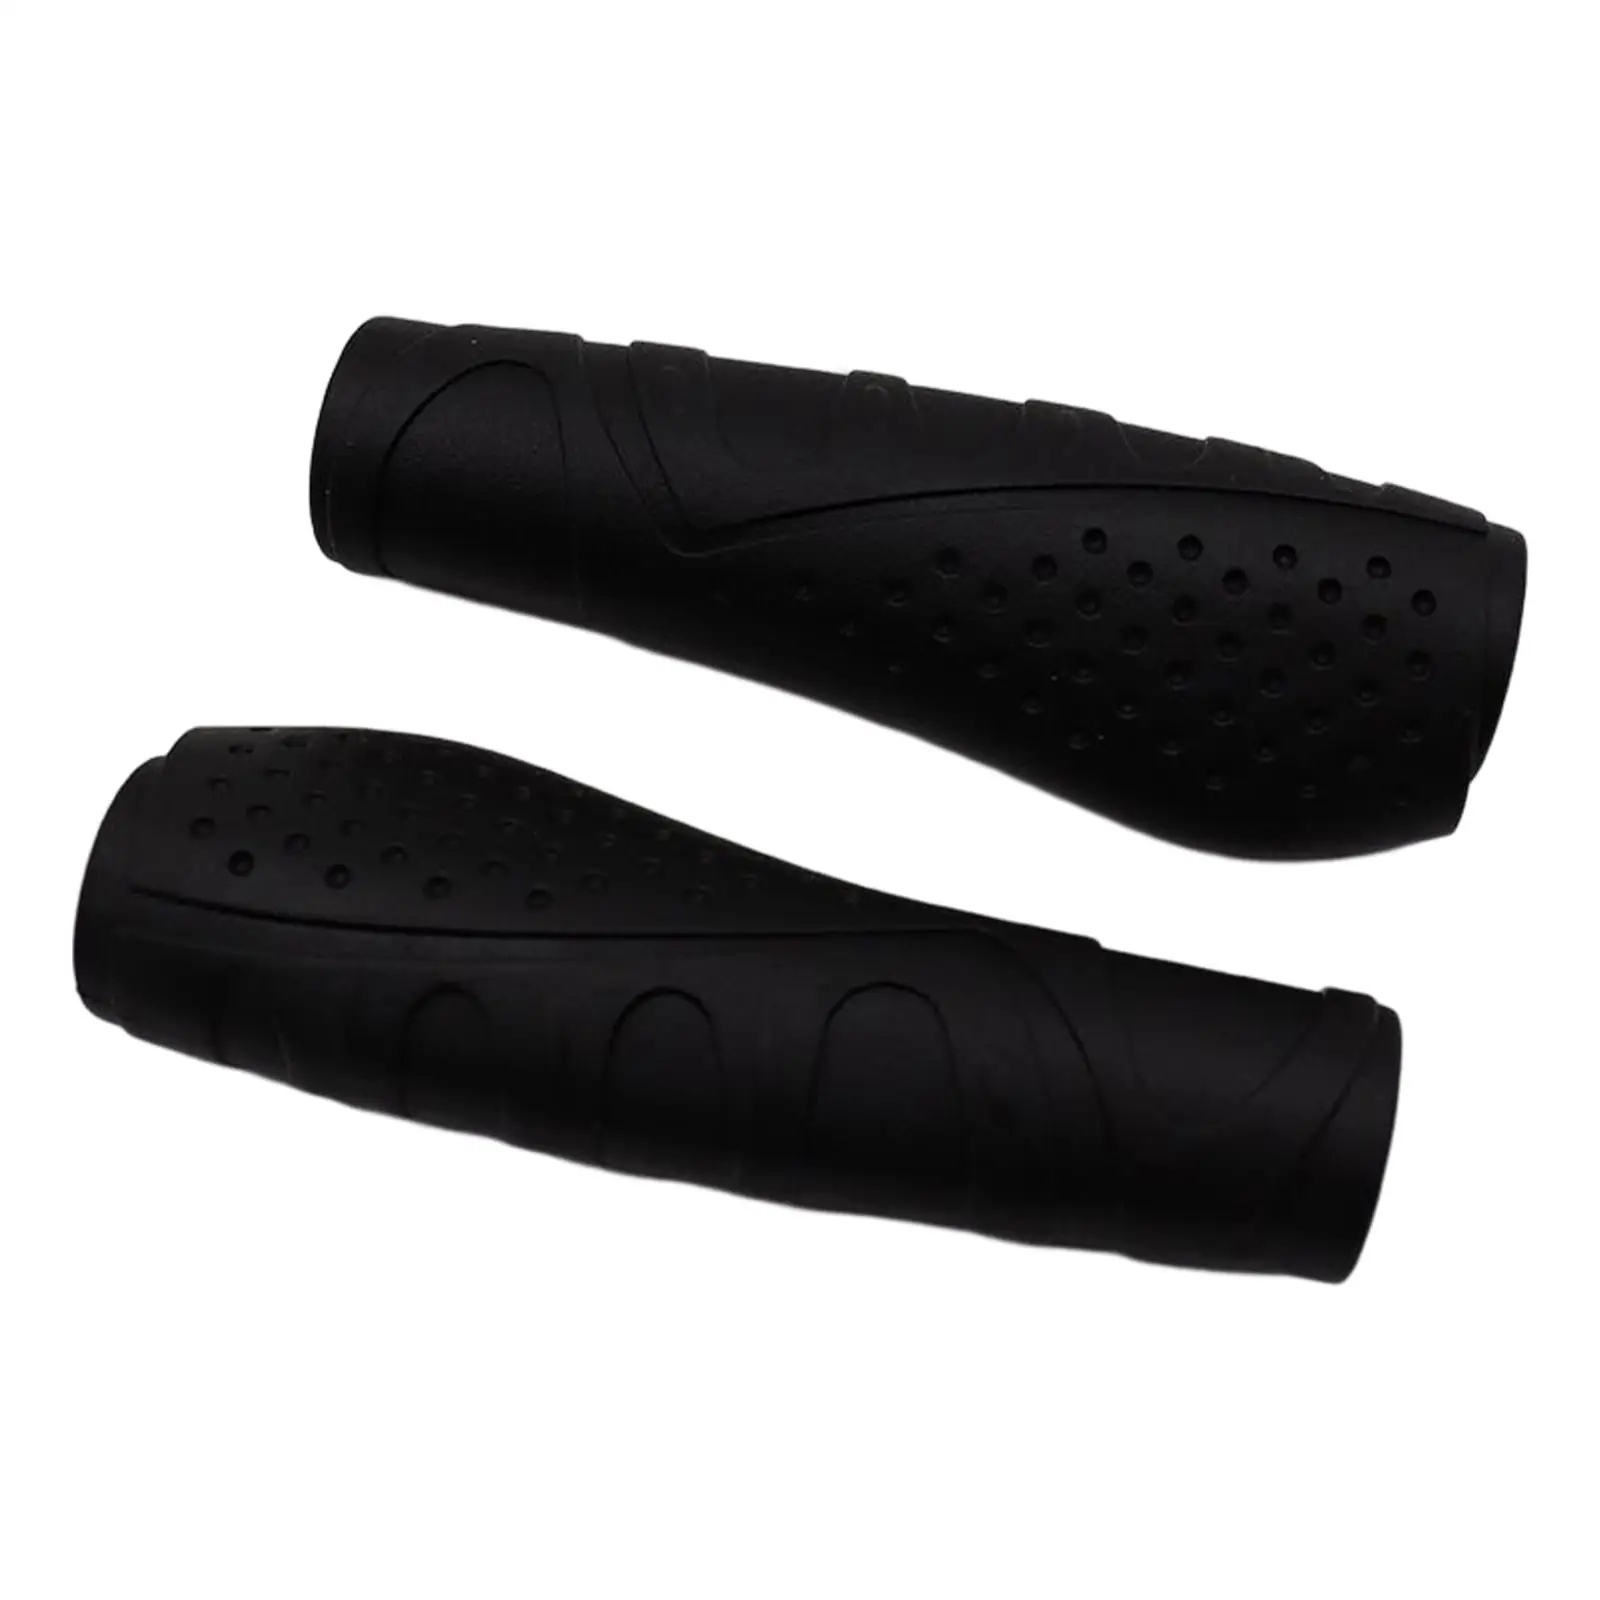 2Pcs Bike Handle Grips Waterproof Replace Bicycle Handlebar Grips for Foldable